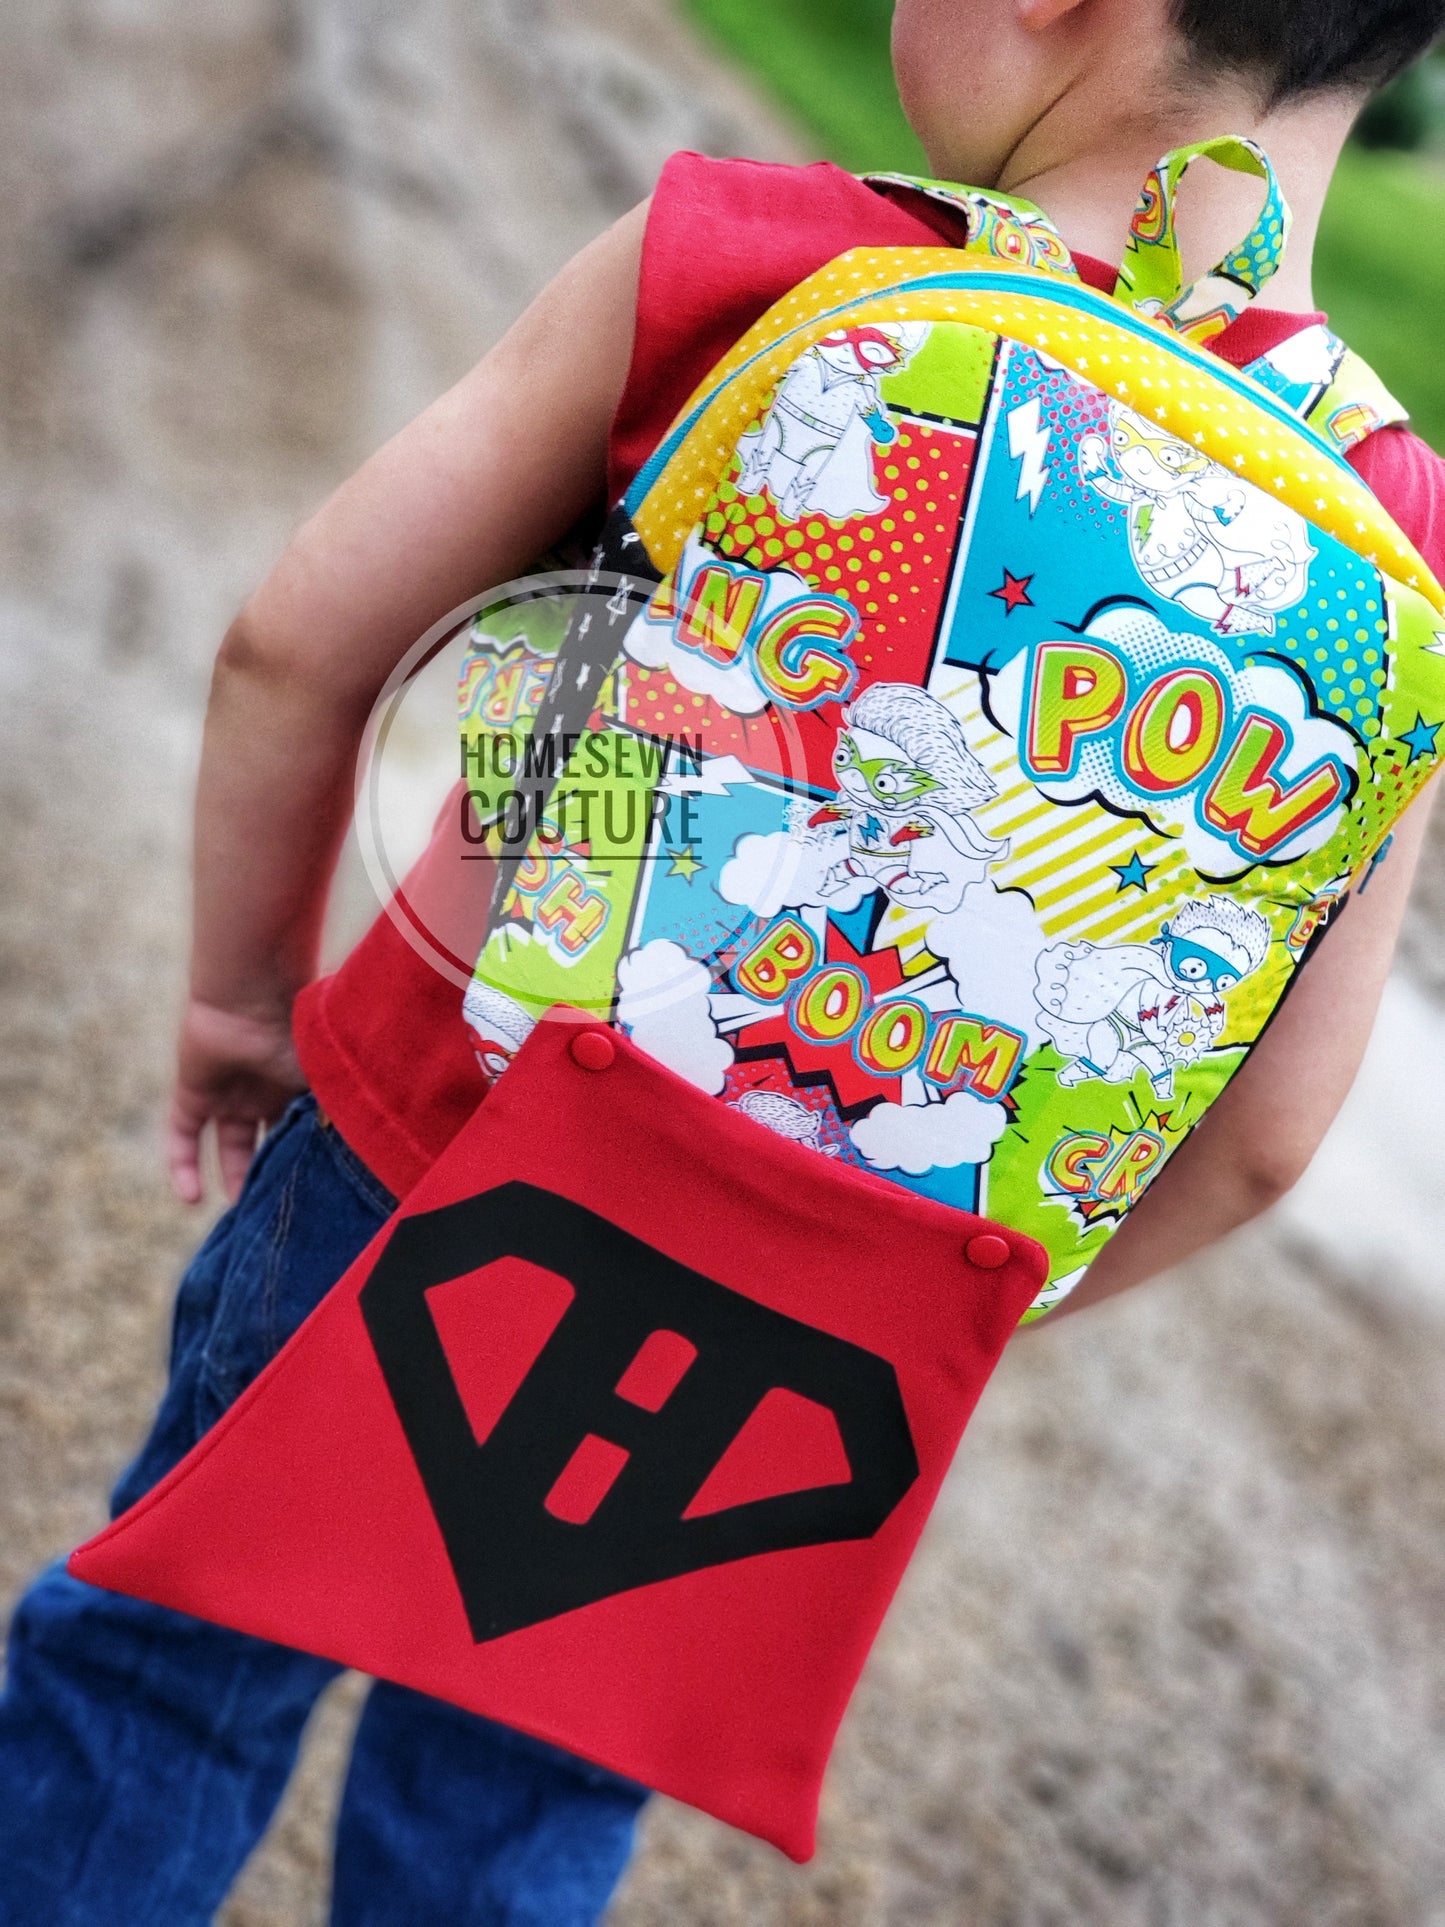 RETAIL - Hero Kids Print/Panel Rapport sets 2 panels and print all in one yard. Citrus